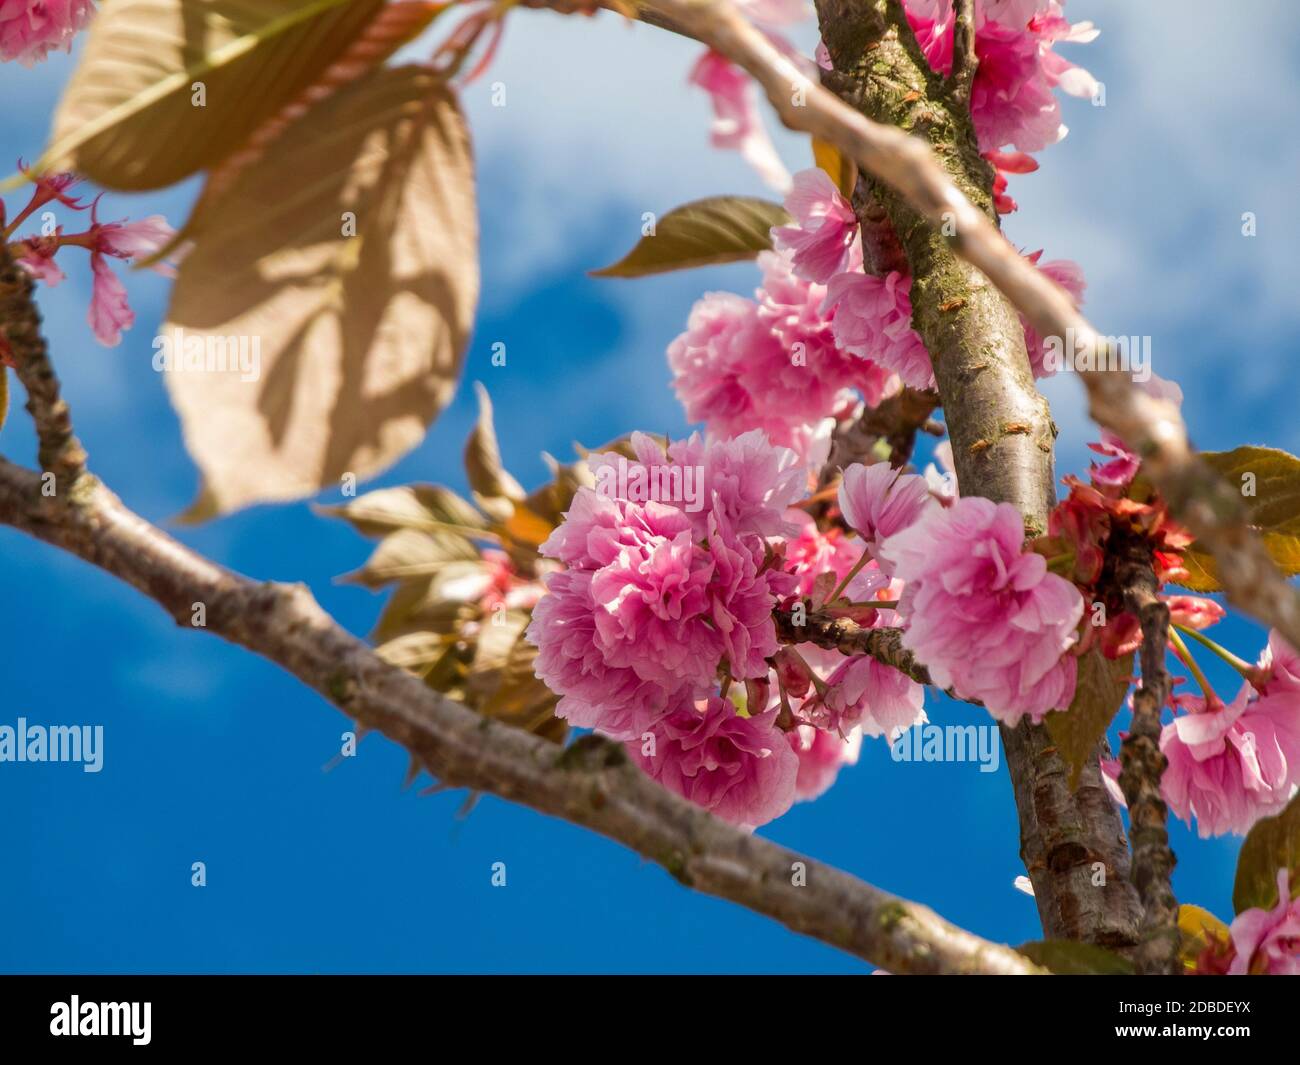 Low angle view closeup of a group of cherry blossoms on a branch against a blue sky with white clouds in Brandenburg / Germany. Stock Photo